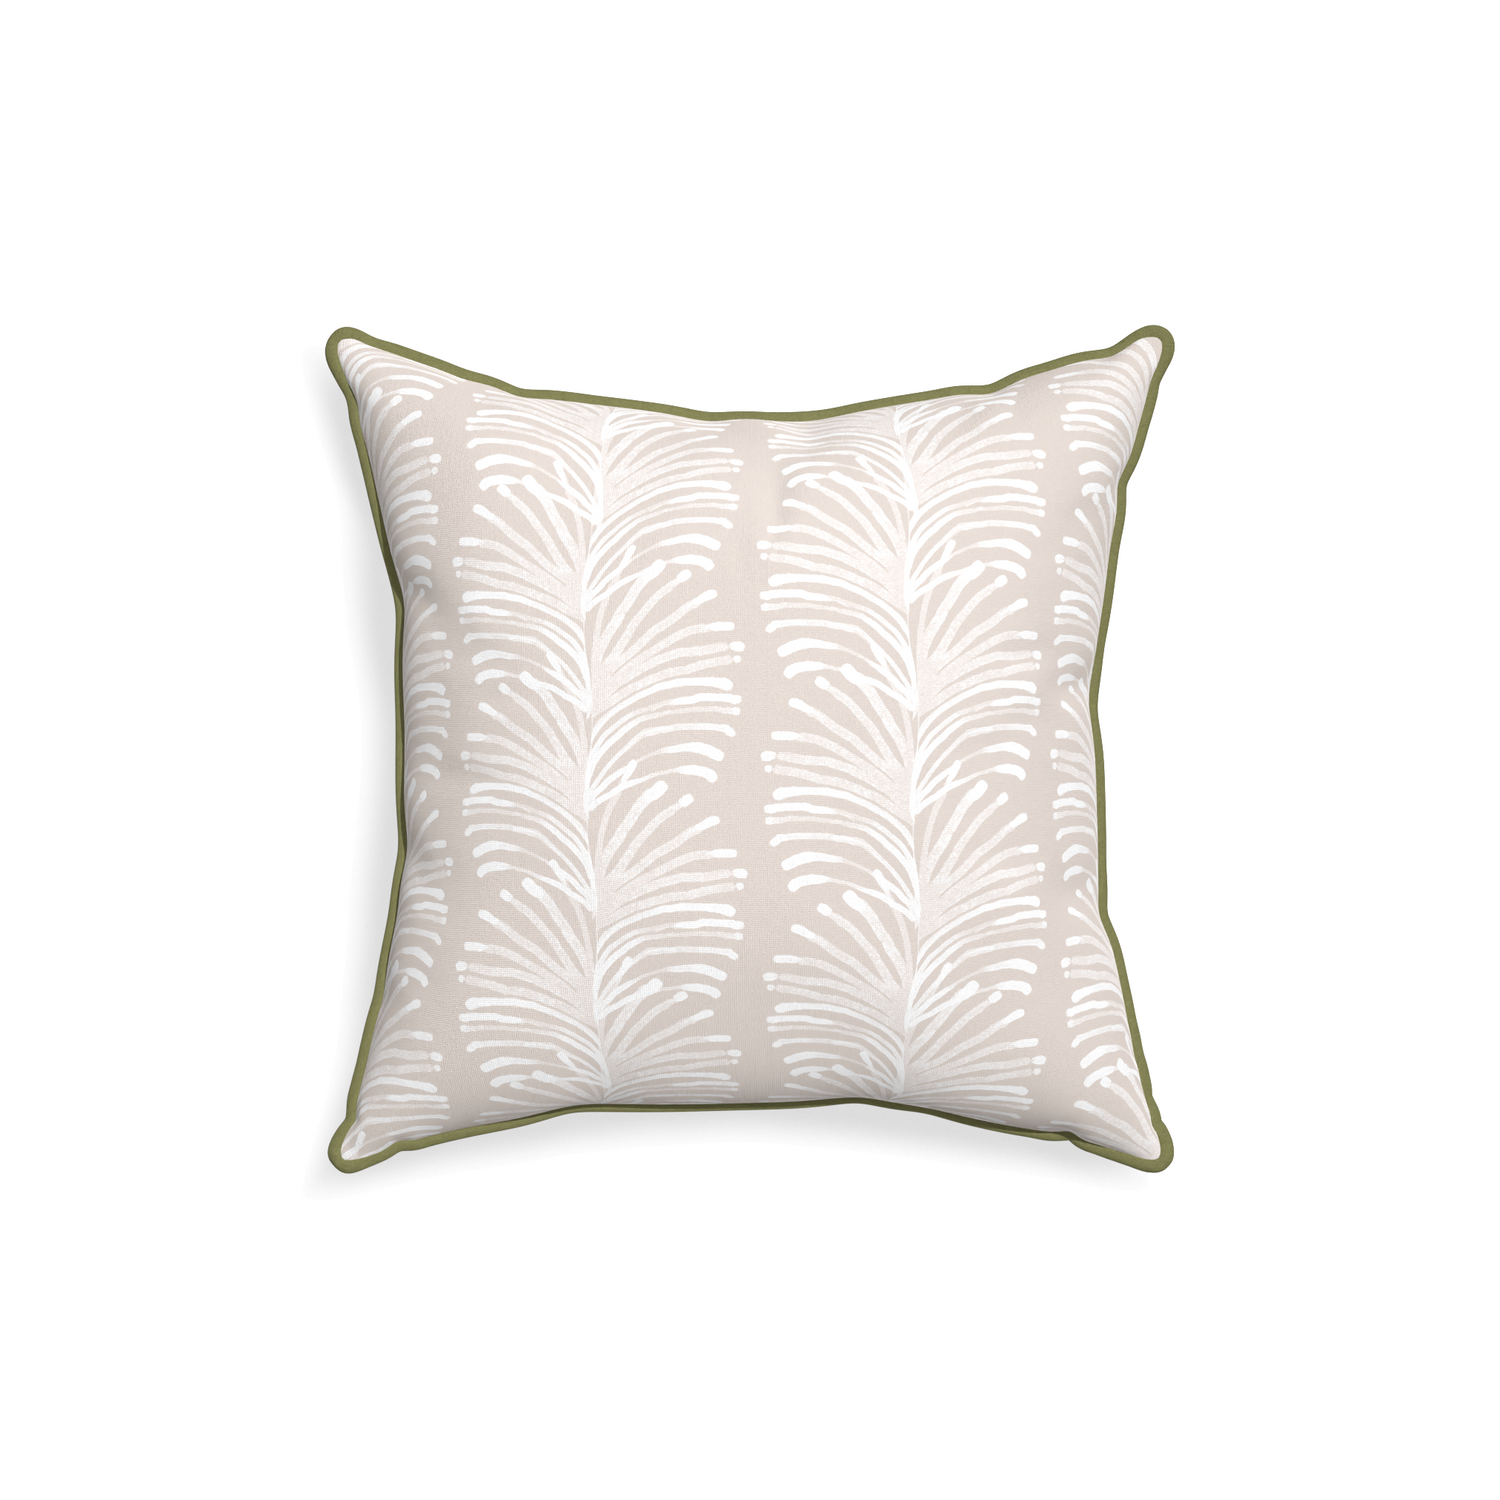 18-square emma sand custom sand colored botanical stripepillow with moss piping on white background